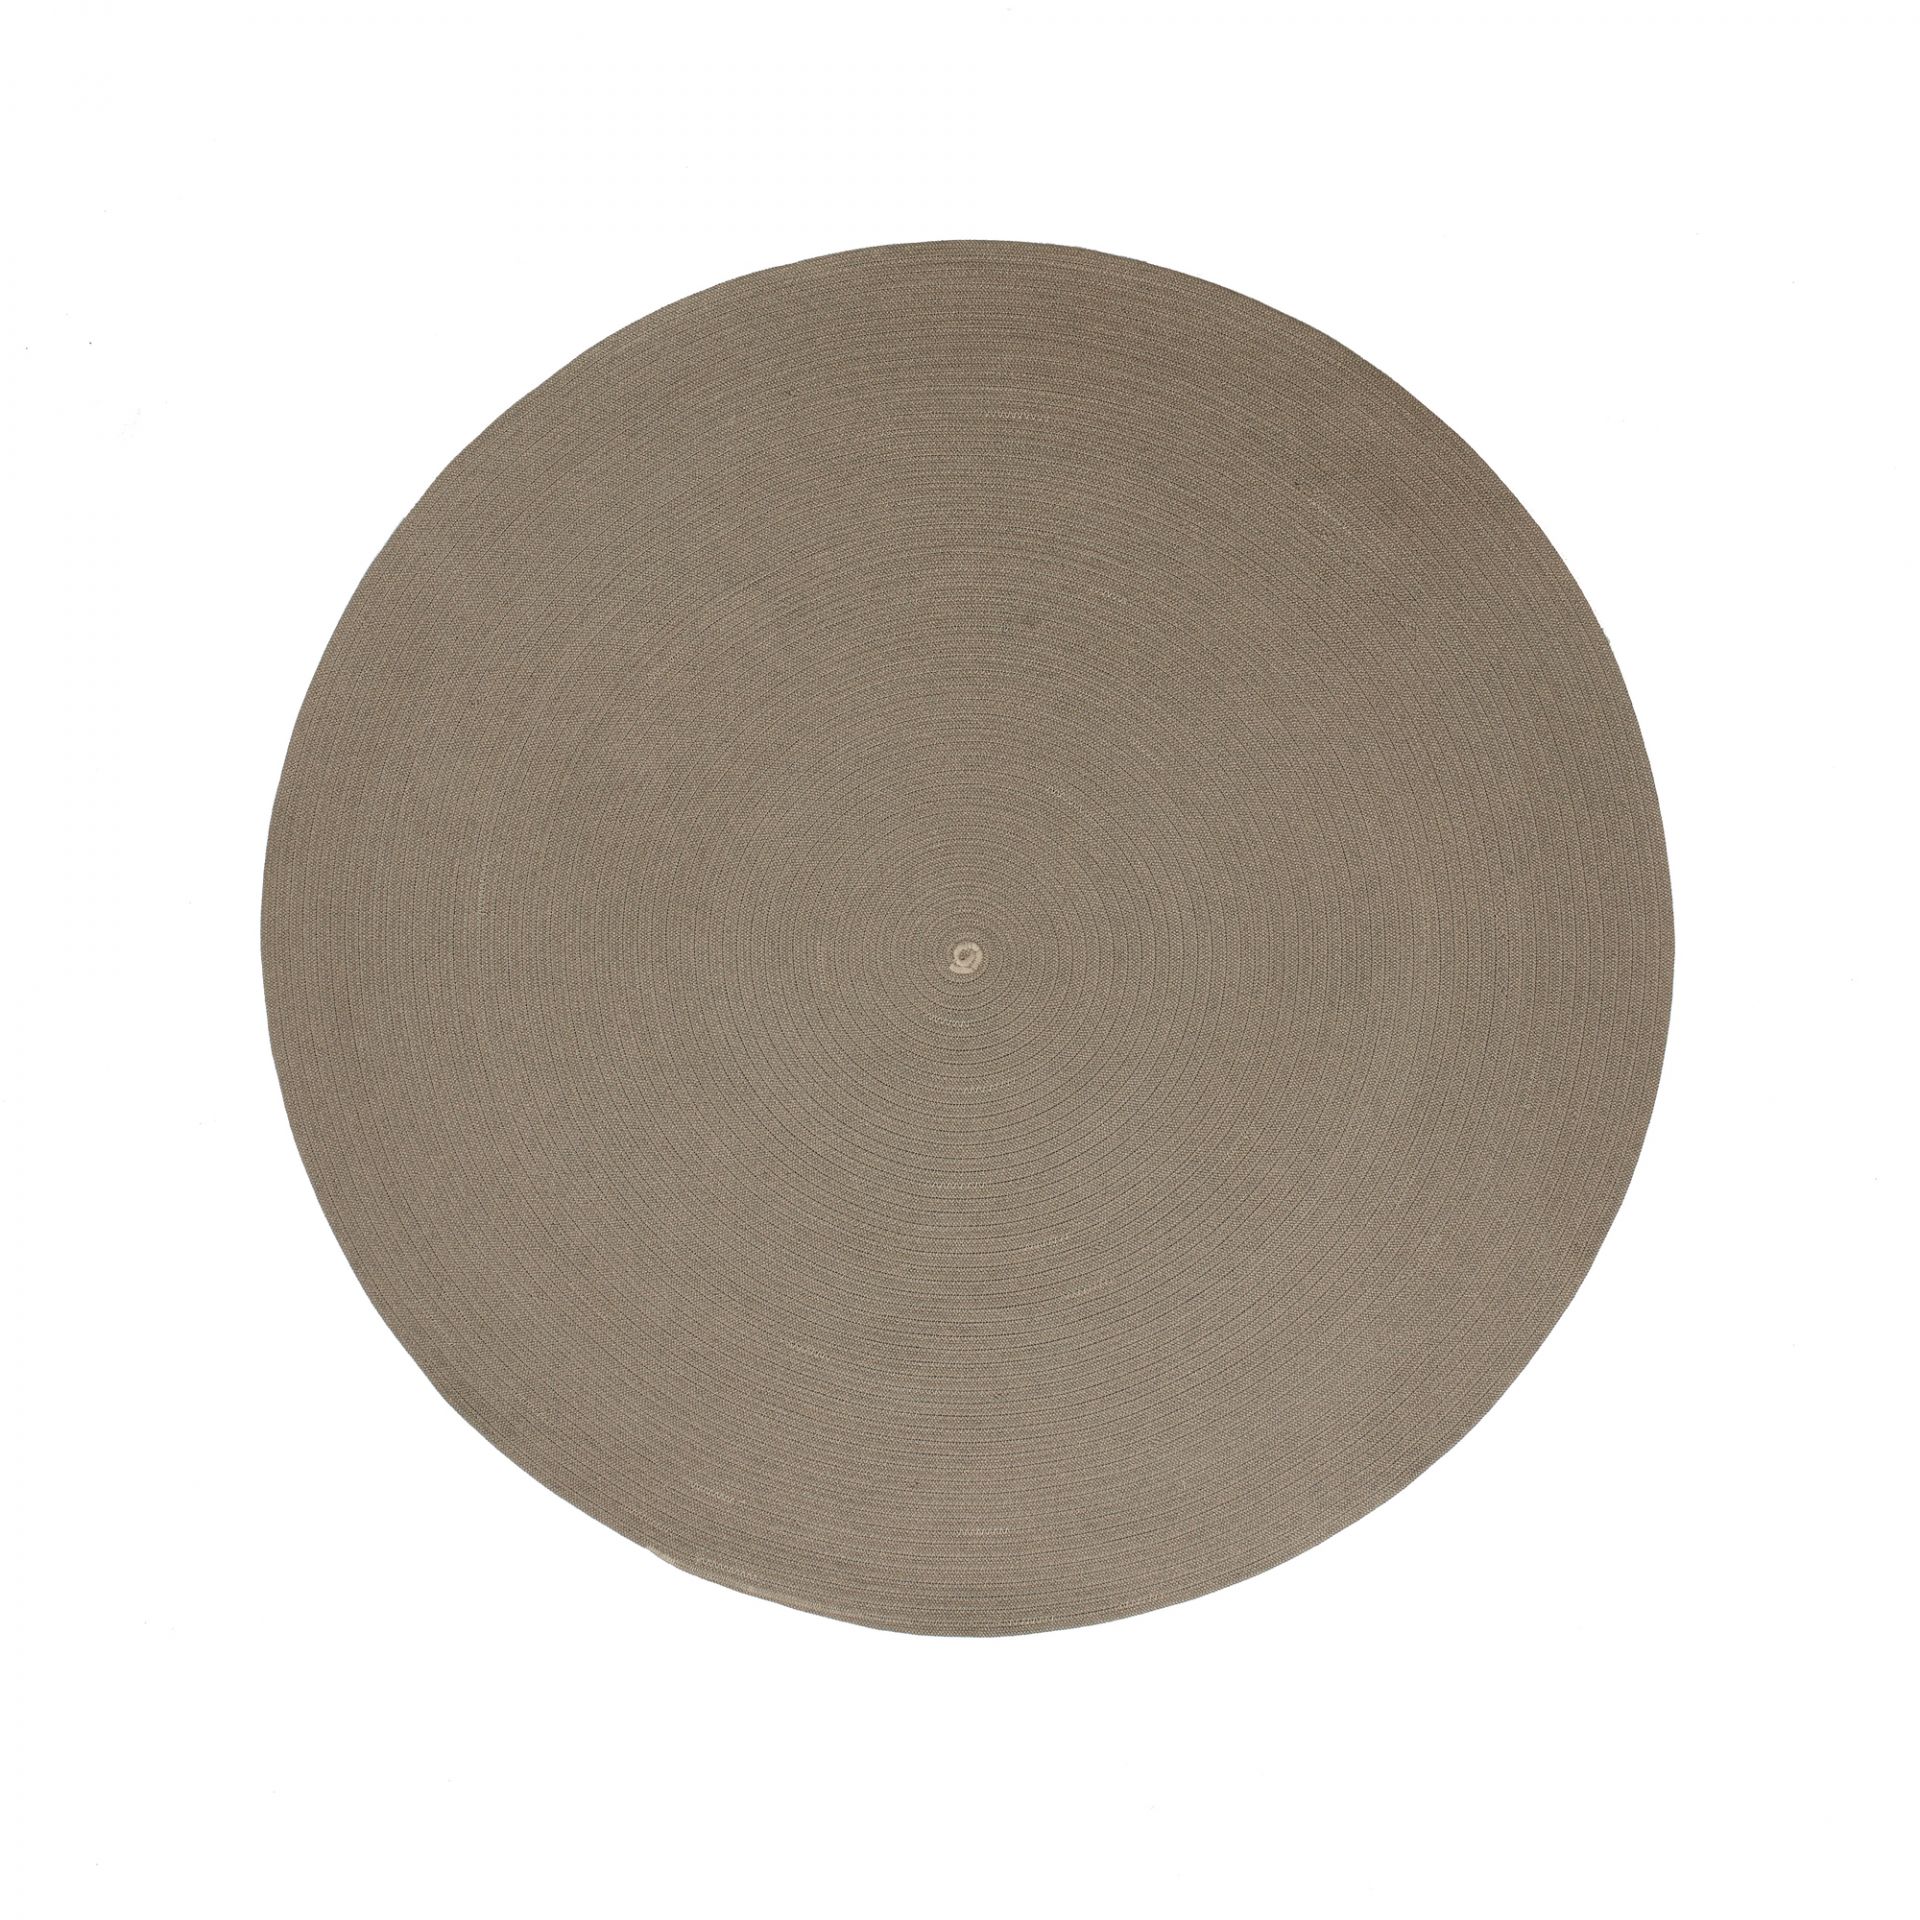 Circle Outdoor Teppich Cane-Line taupe